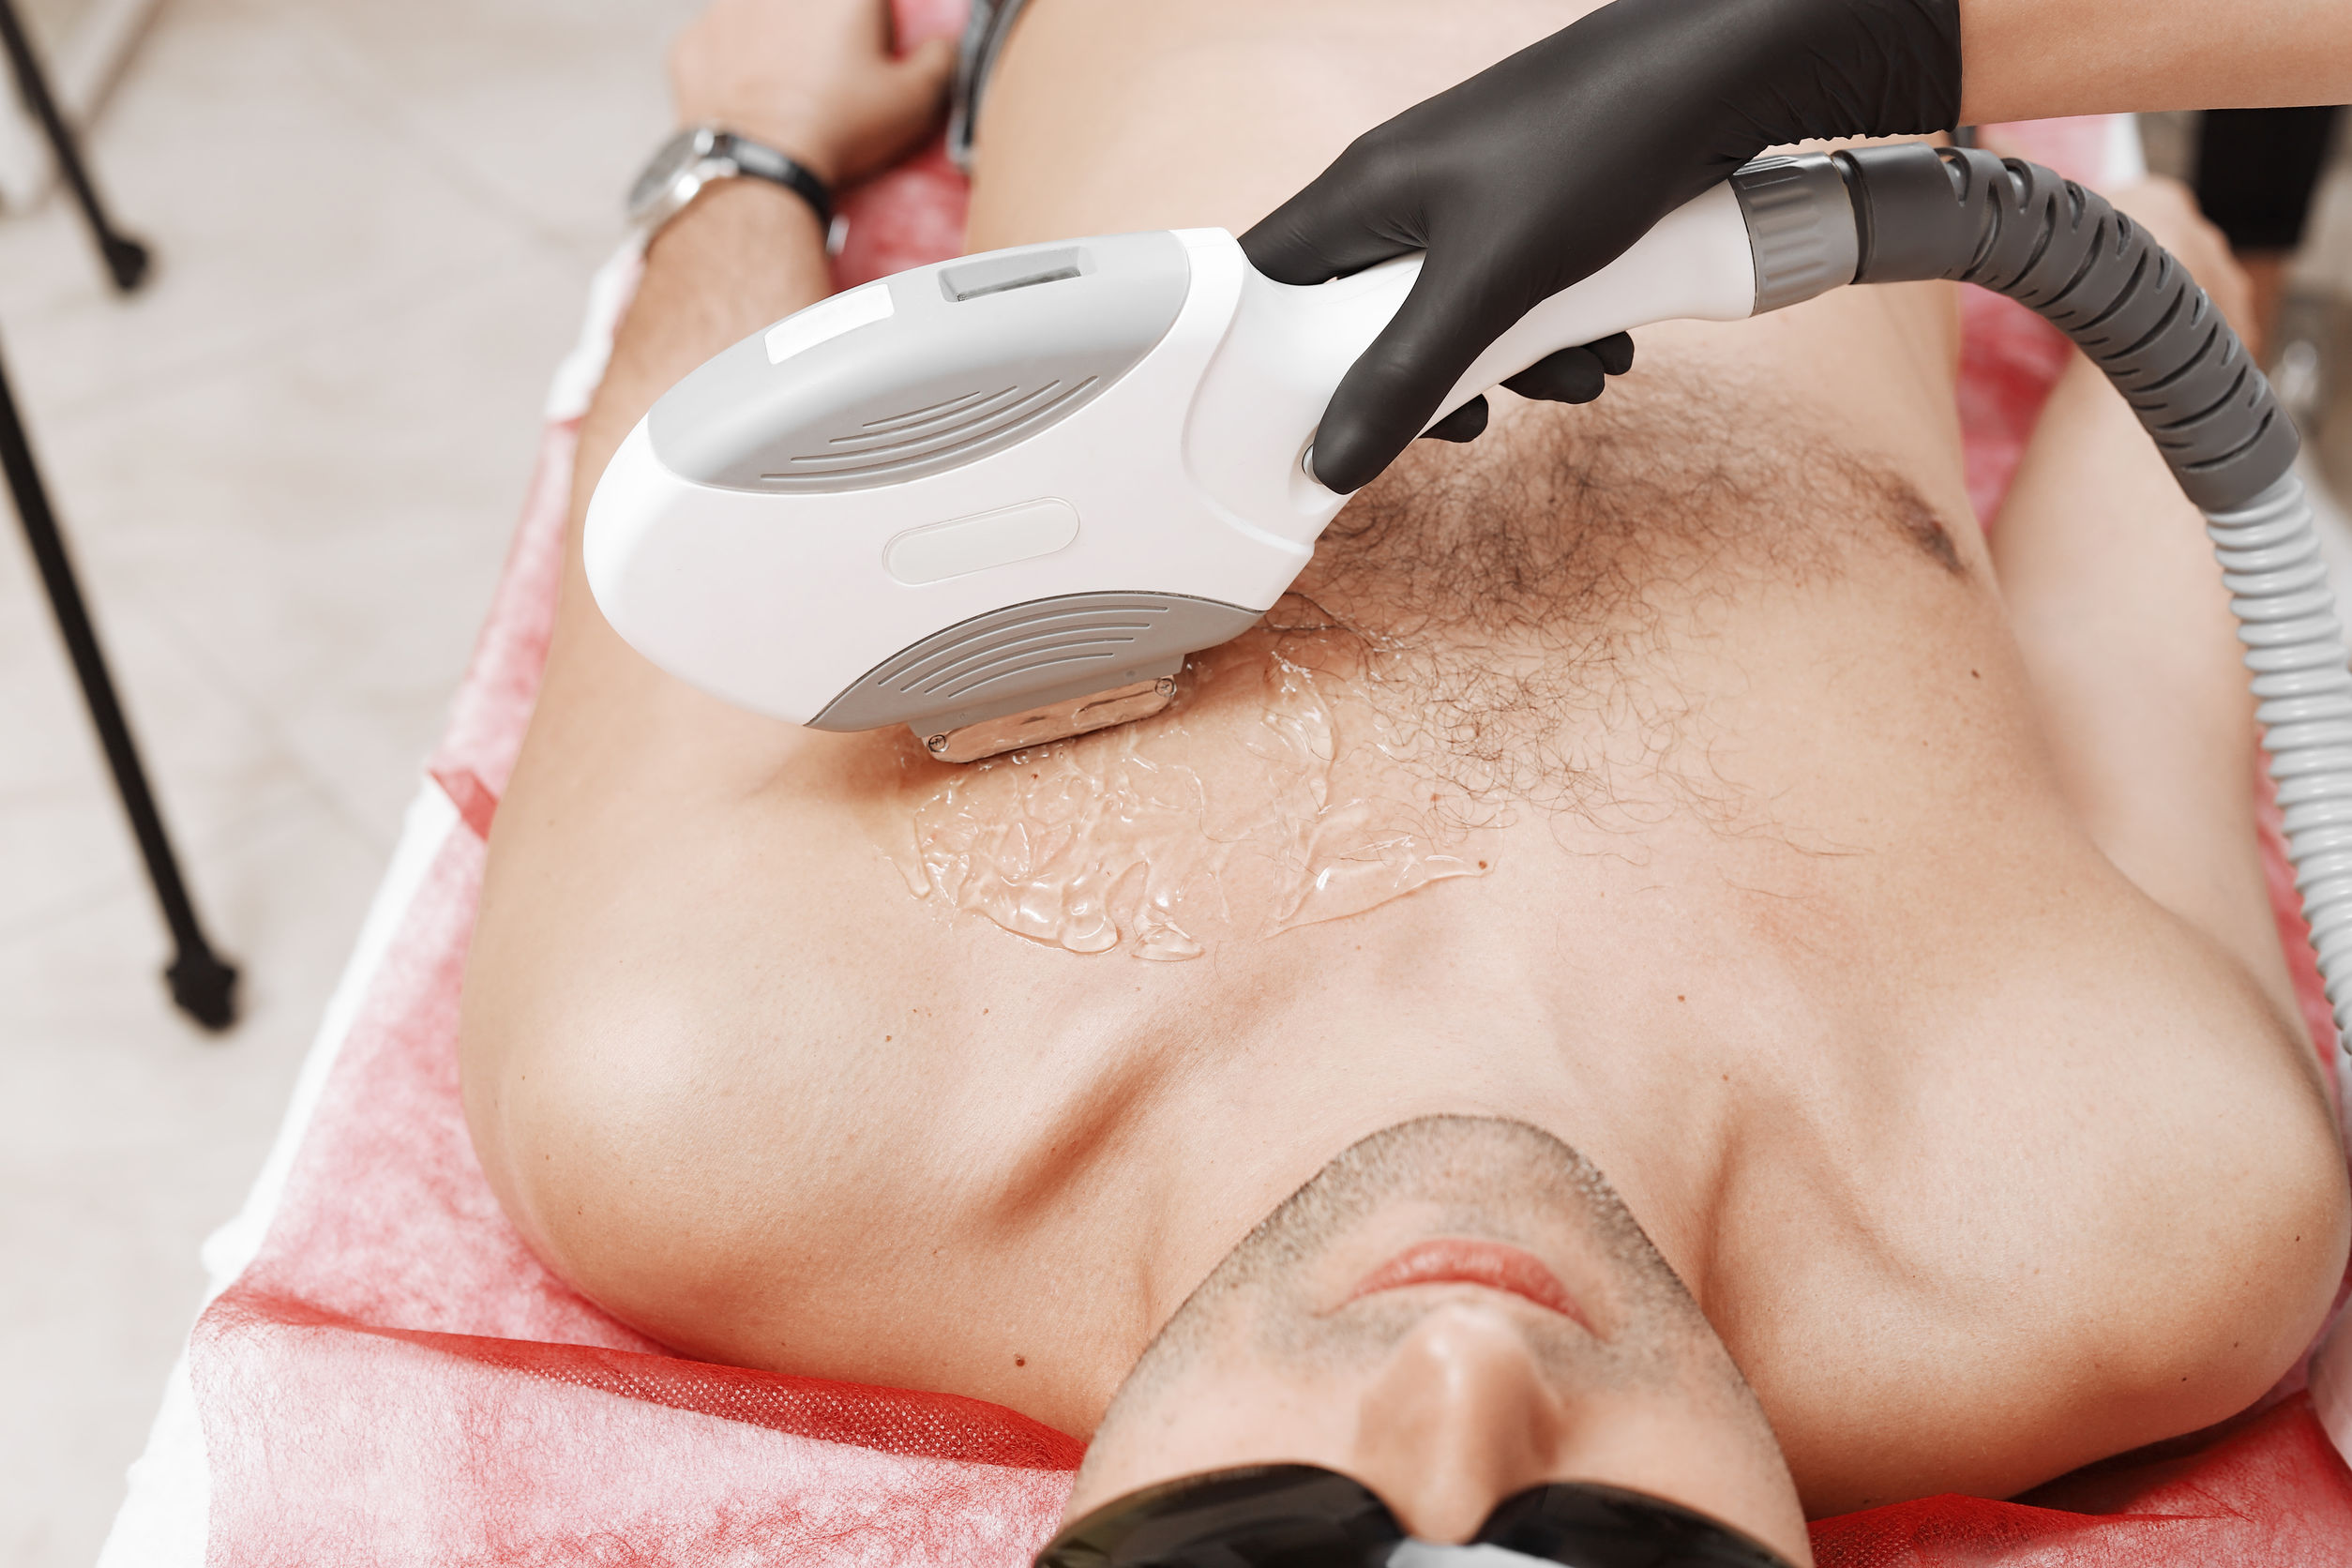 IPL offers permament hair reduction and uses a larger wand and cooling gel.